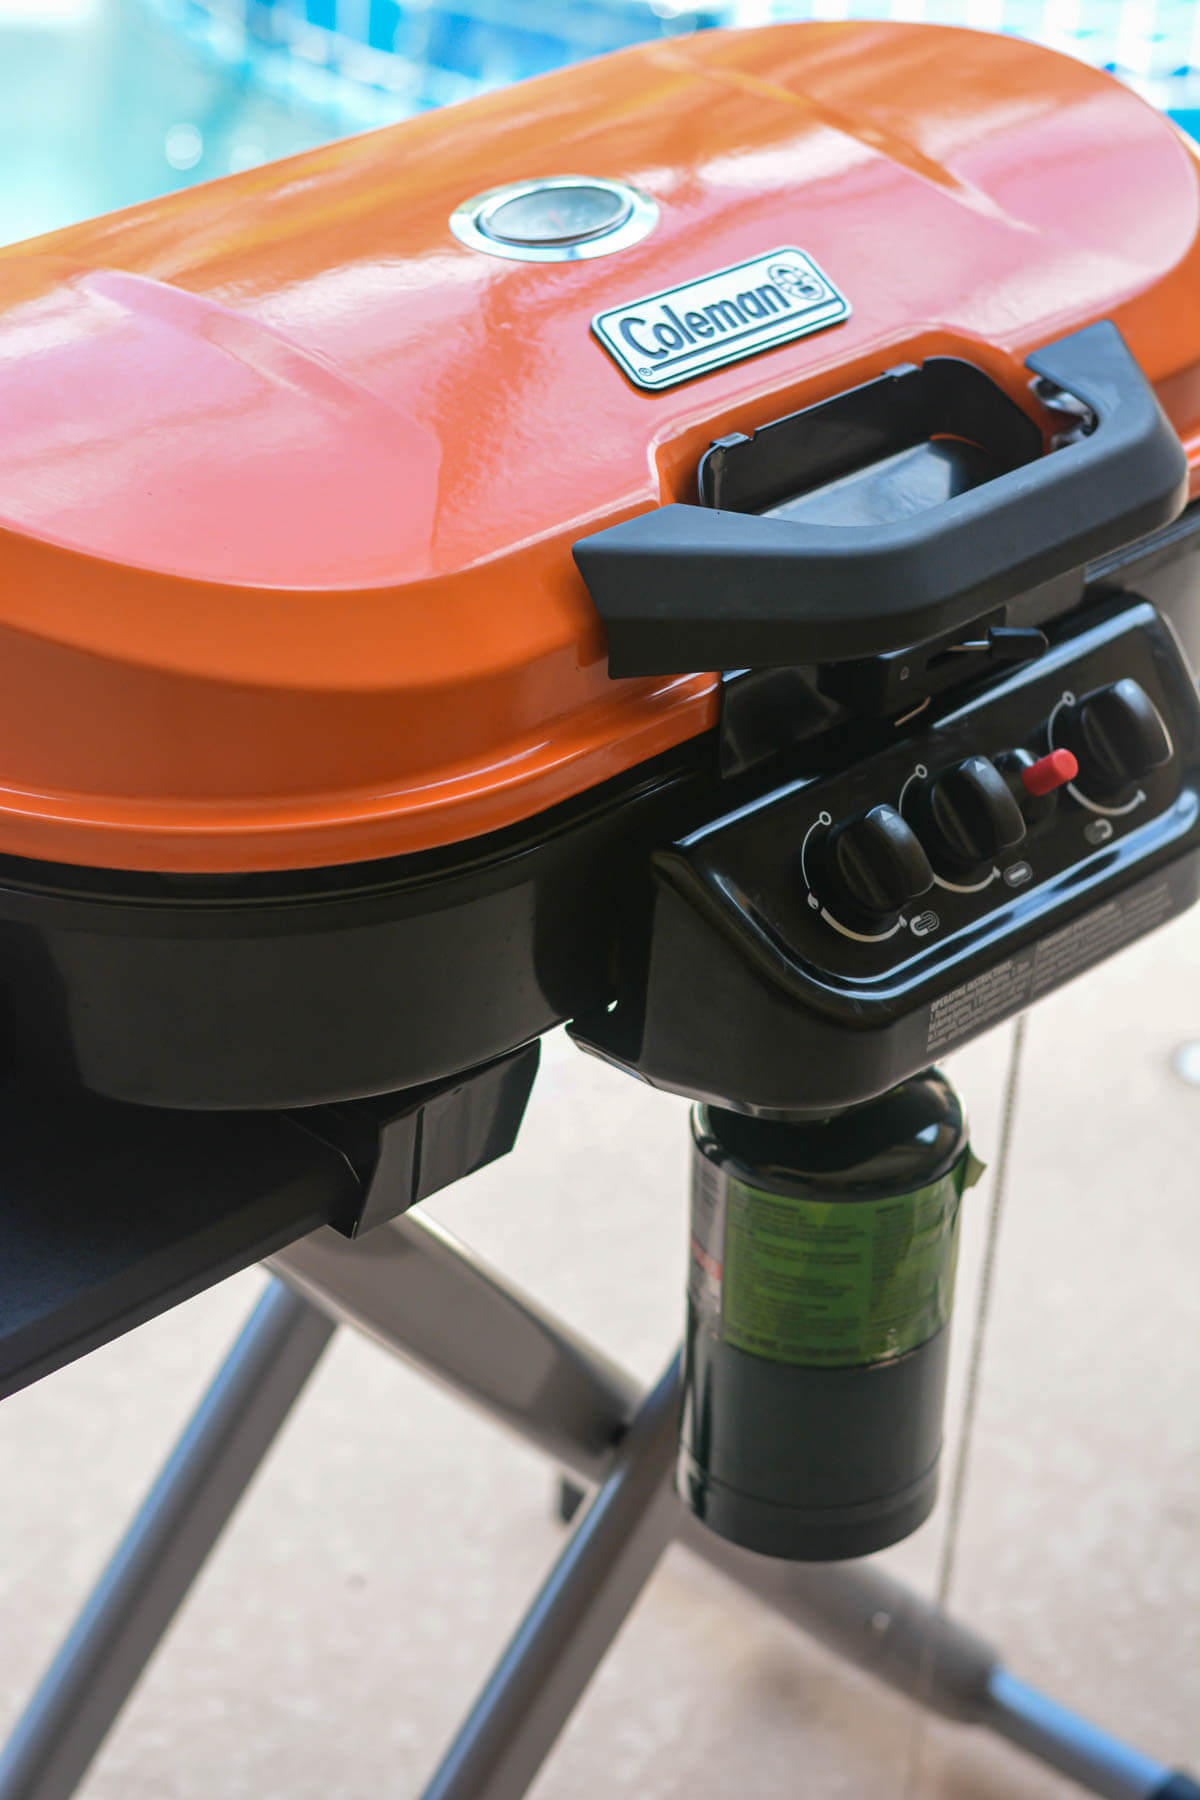 coleman grill with a small propane bottle.